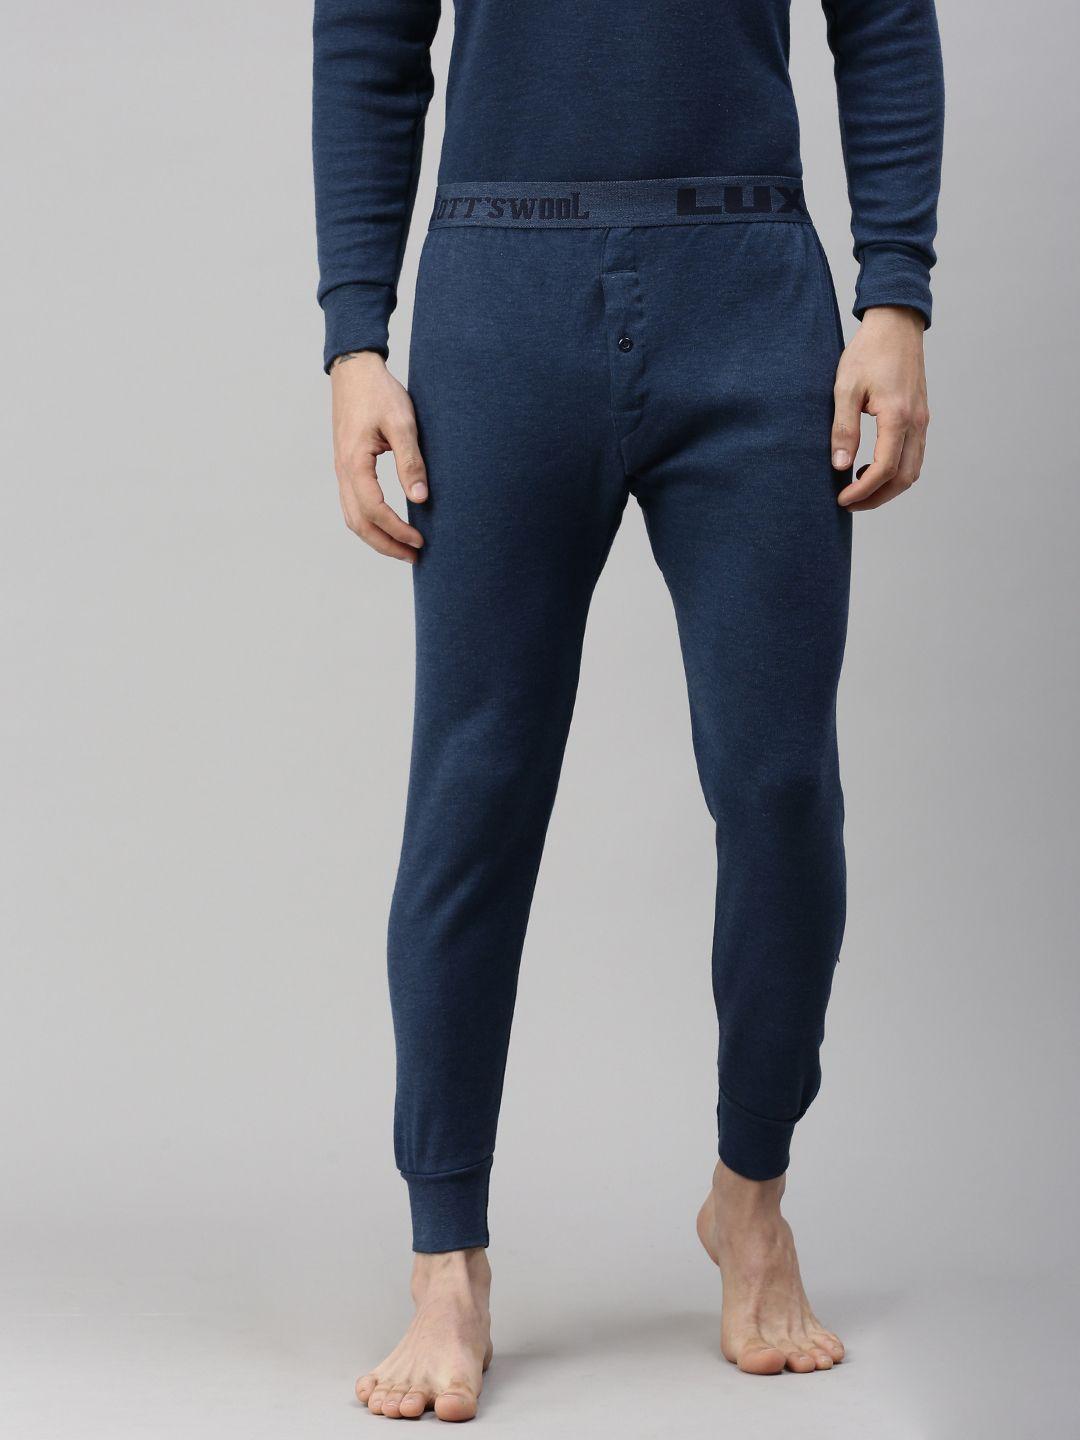 lux cottswool men blue ribbed thermal bottom